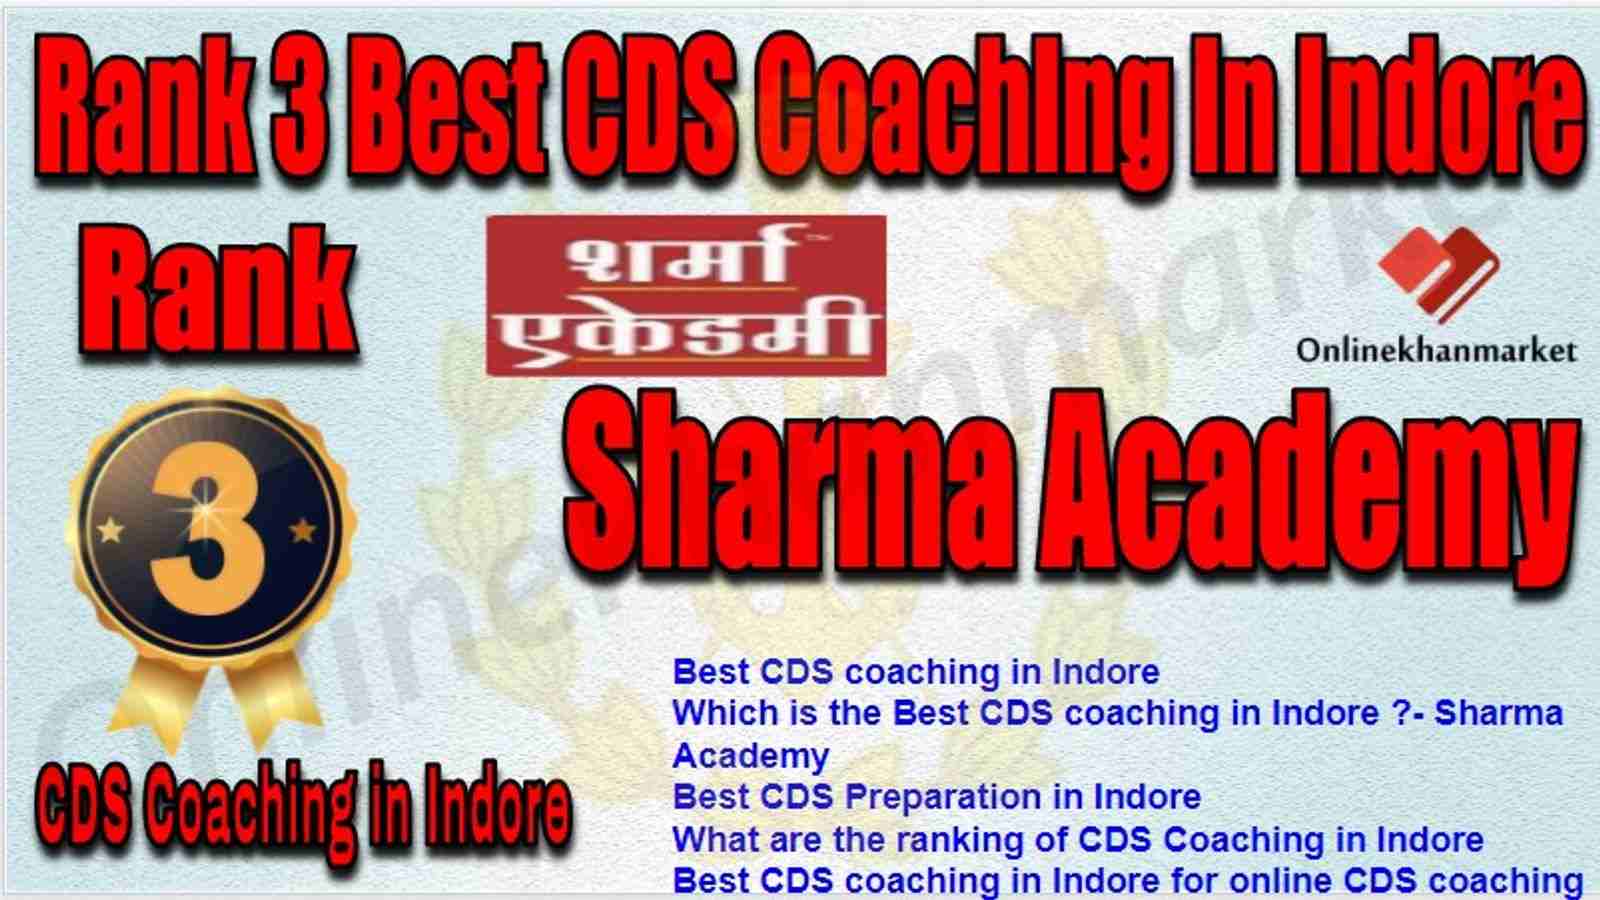 Rank 3 Best CDS Coaching in indore